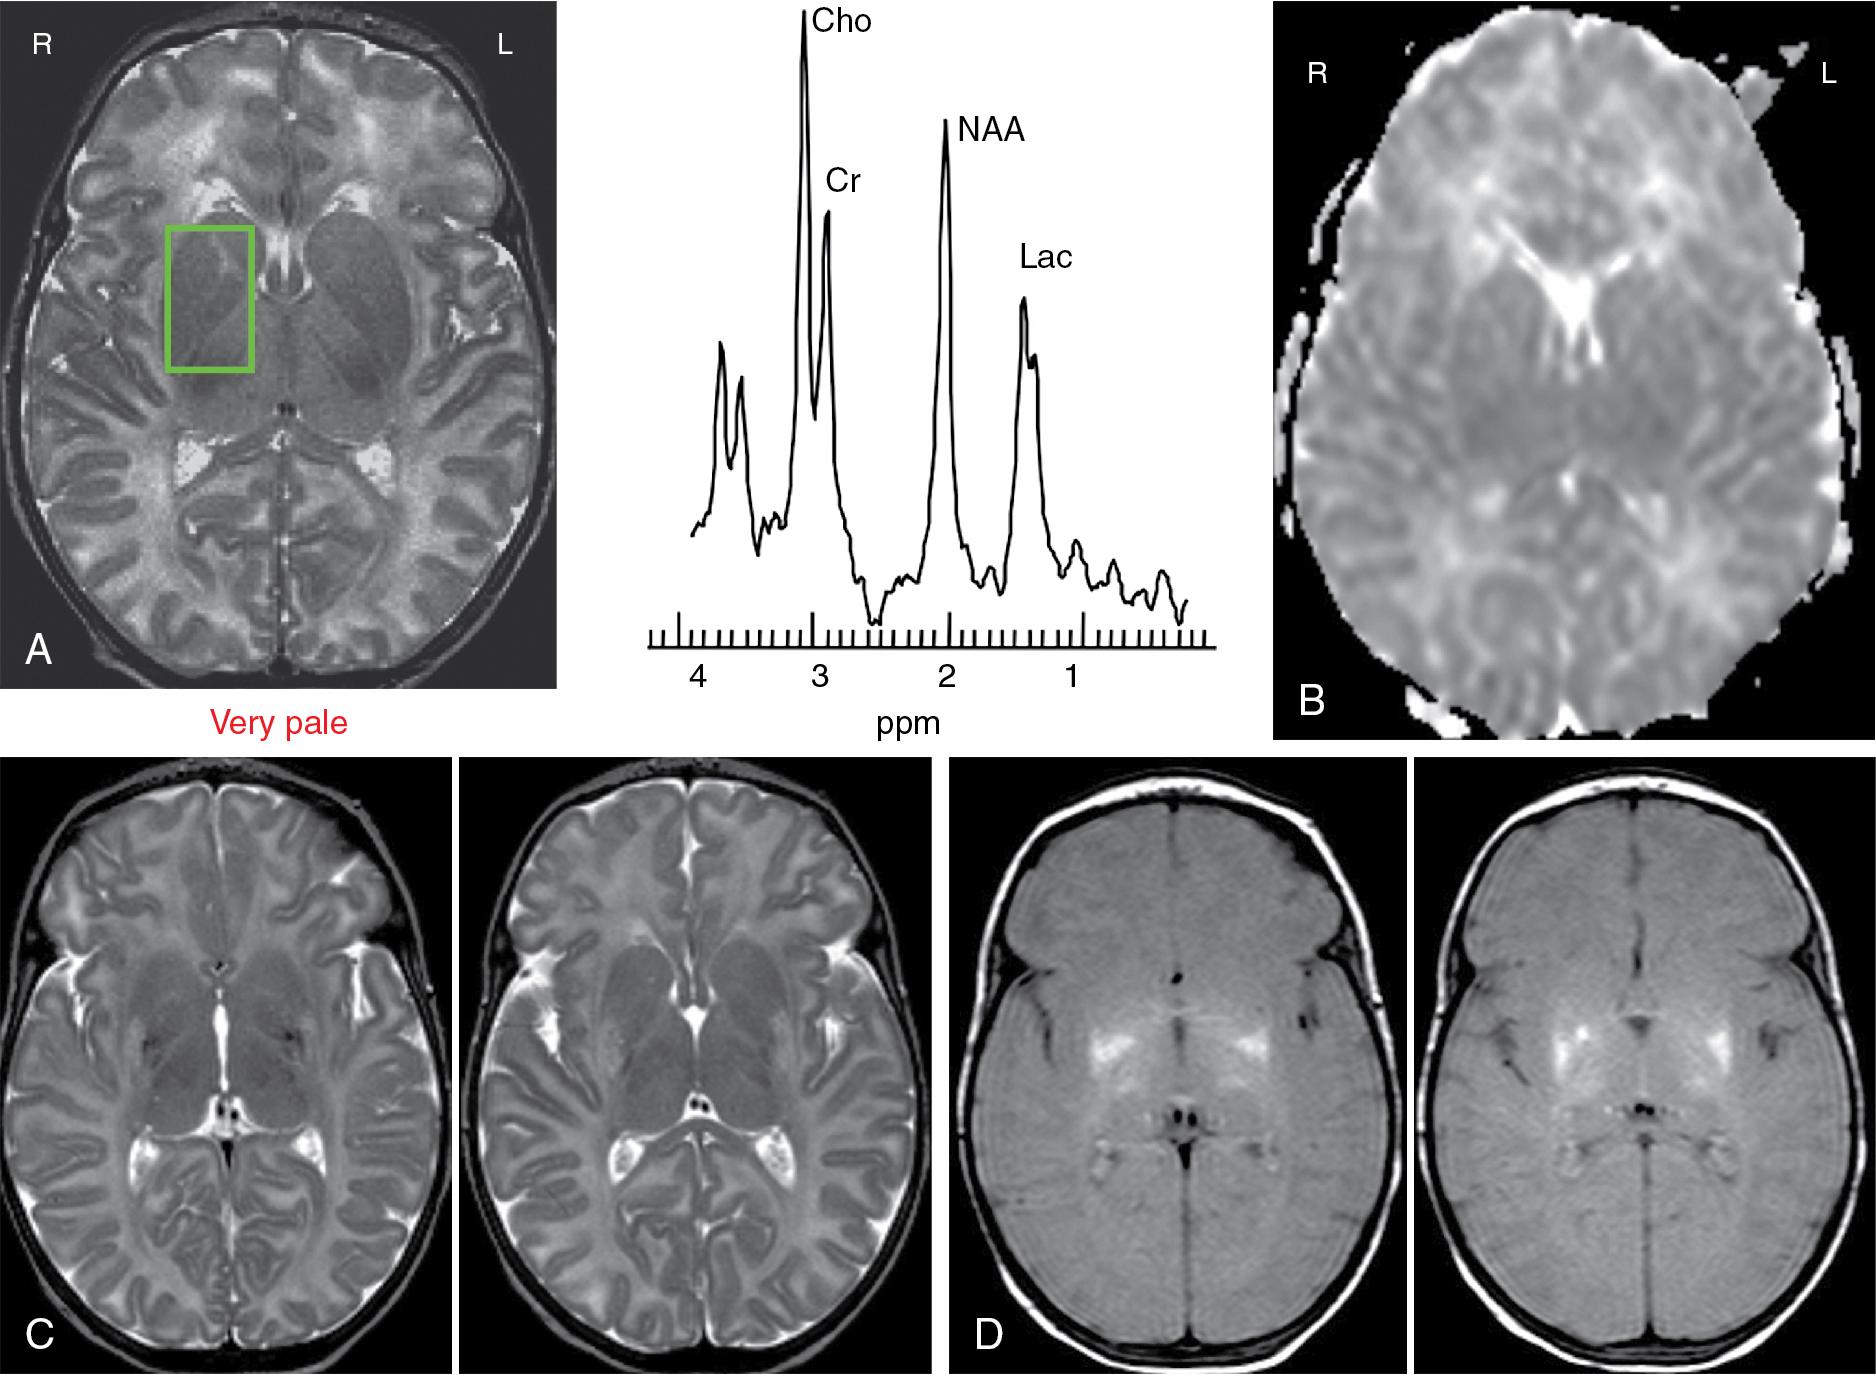 Fig. 15.3, Case 2: A, MR examination obtained at 12 hours after perinatal asphyxia. Axial T2-weighted image shows no signal abnormalities and single voxel 1 H-MRS performed over the right basal ganglia shows markedly increased lactate resonance with preserved N -acetylaspartate (NAA), Cr, and Cho resonances. B, Diffusion-weighted imaging (DWI) with axial apparent diffusion coefficient (ADC) map shows no diffusion abnormalities. C and D, MRI at 10 days after perinatal asphyxia. C, Axial T2-weighted images show areas of high signal intensity in the putamen and thalamus representing clear ischemic-lesions. D, Axial Proton density images with excellent detection of the lesion extension.